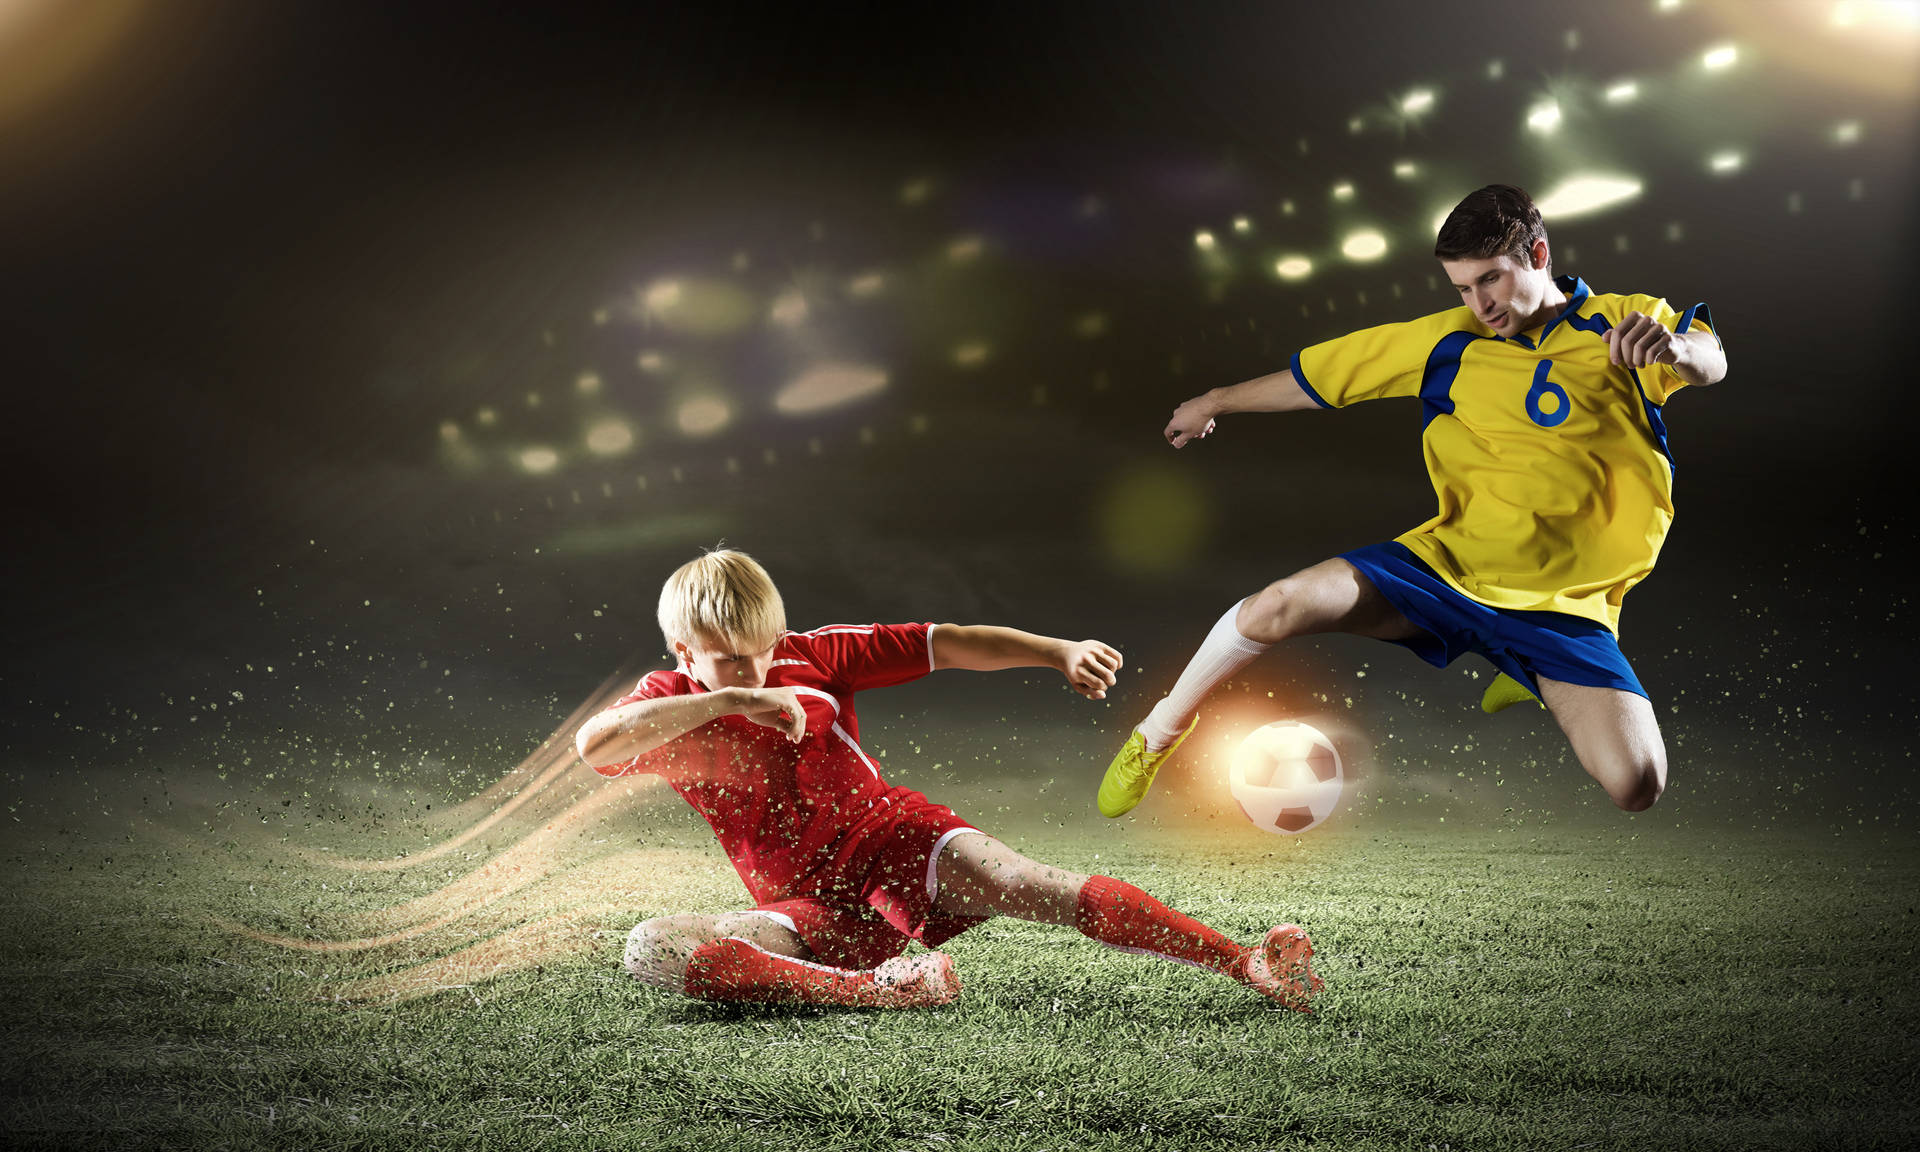 Professional soccer players competing on the field. Wallpaper